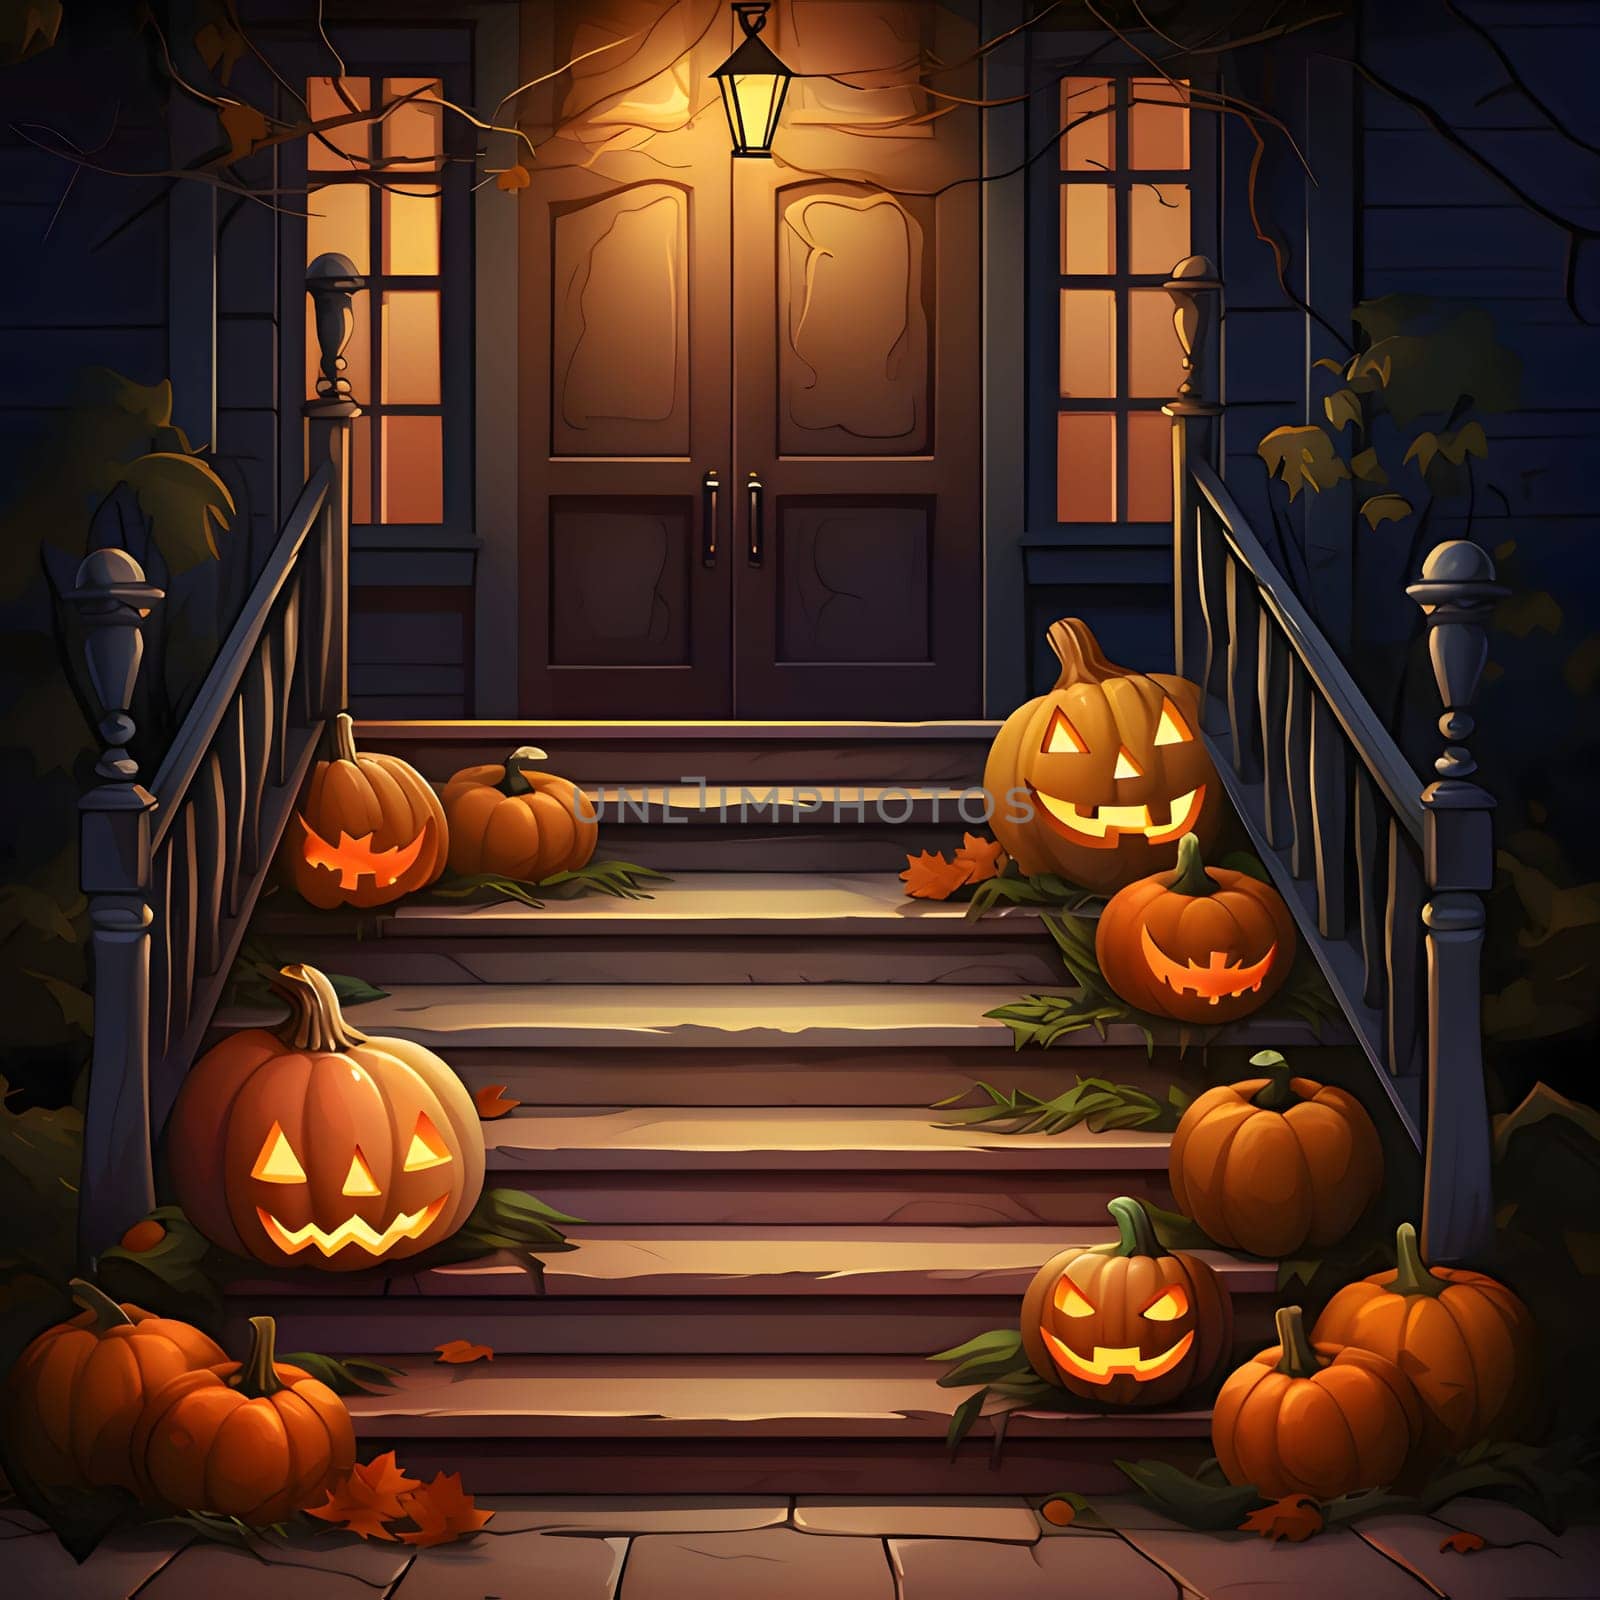 The entrance stairs to the house decorated with glowing jack-o-lantern pumpkins, a Halloween image. by ThemesS